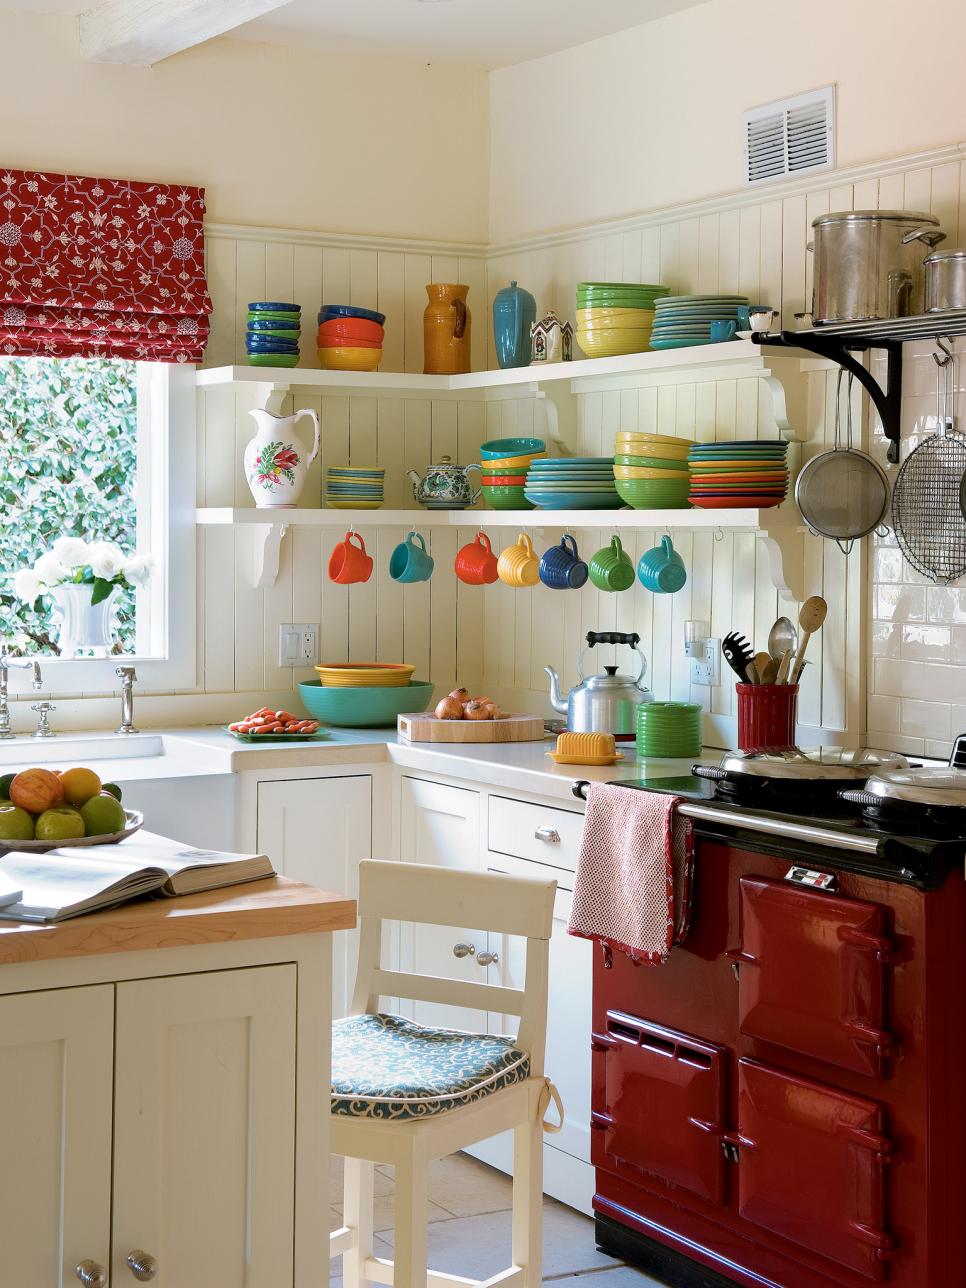 small kitchen designs pictures of small kitchen design ideas from hgtv | hgtv ZZMTJWQ